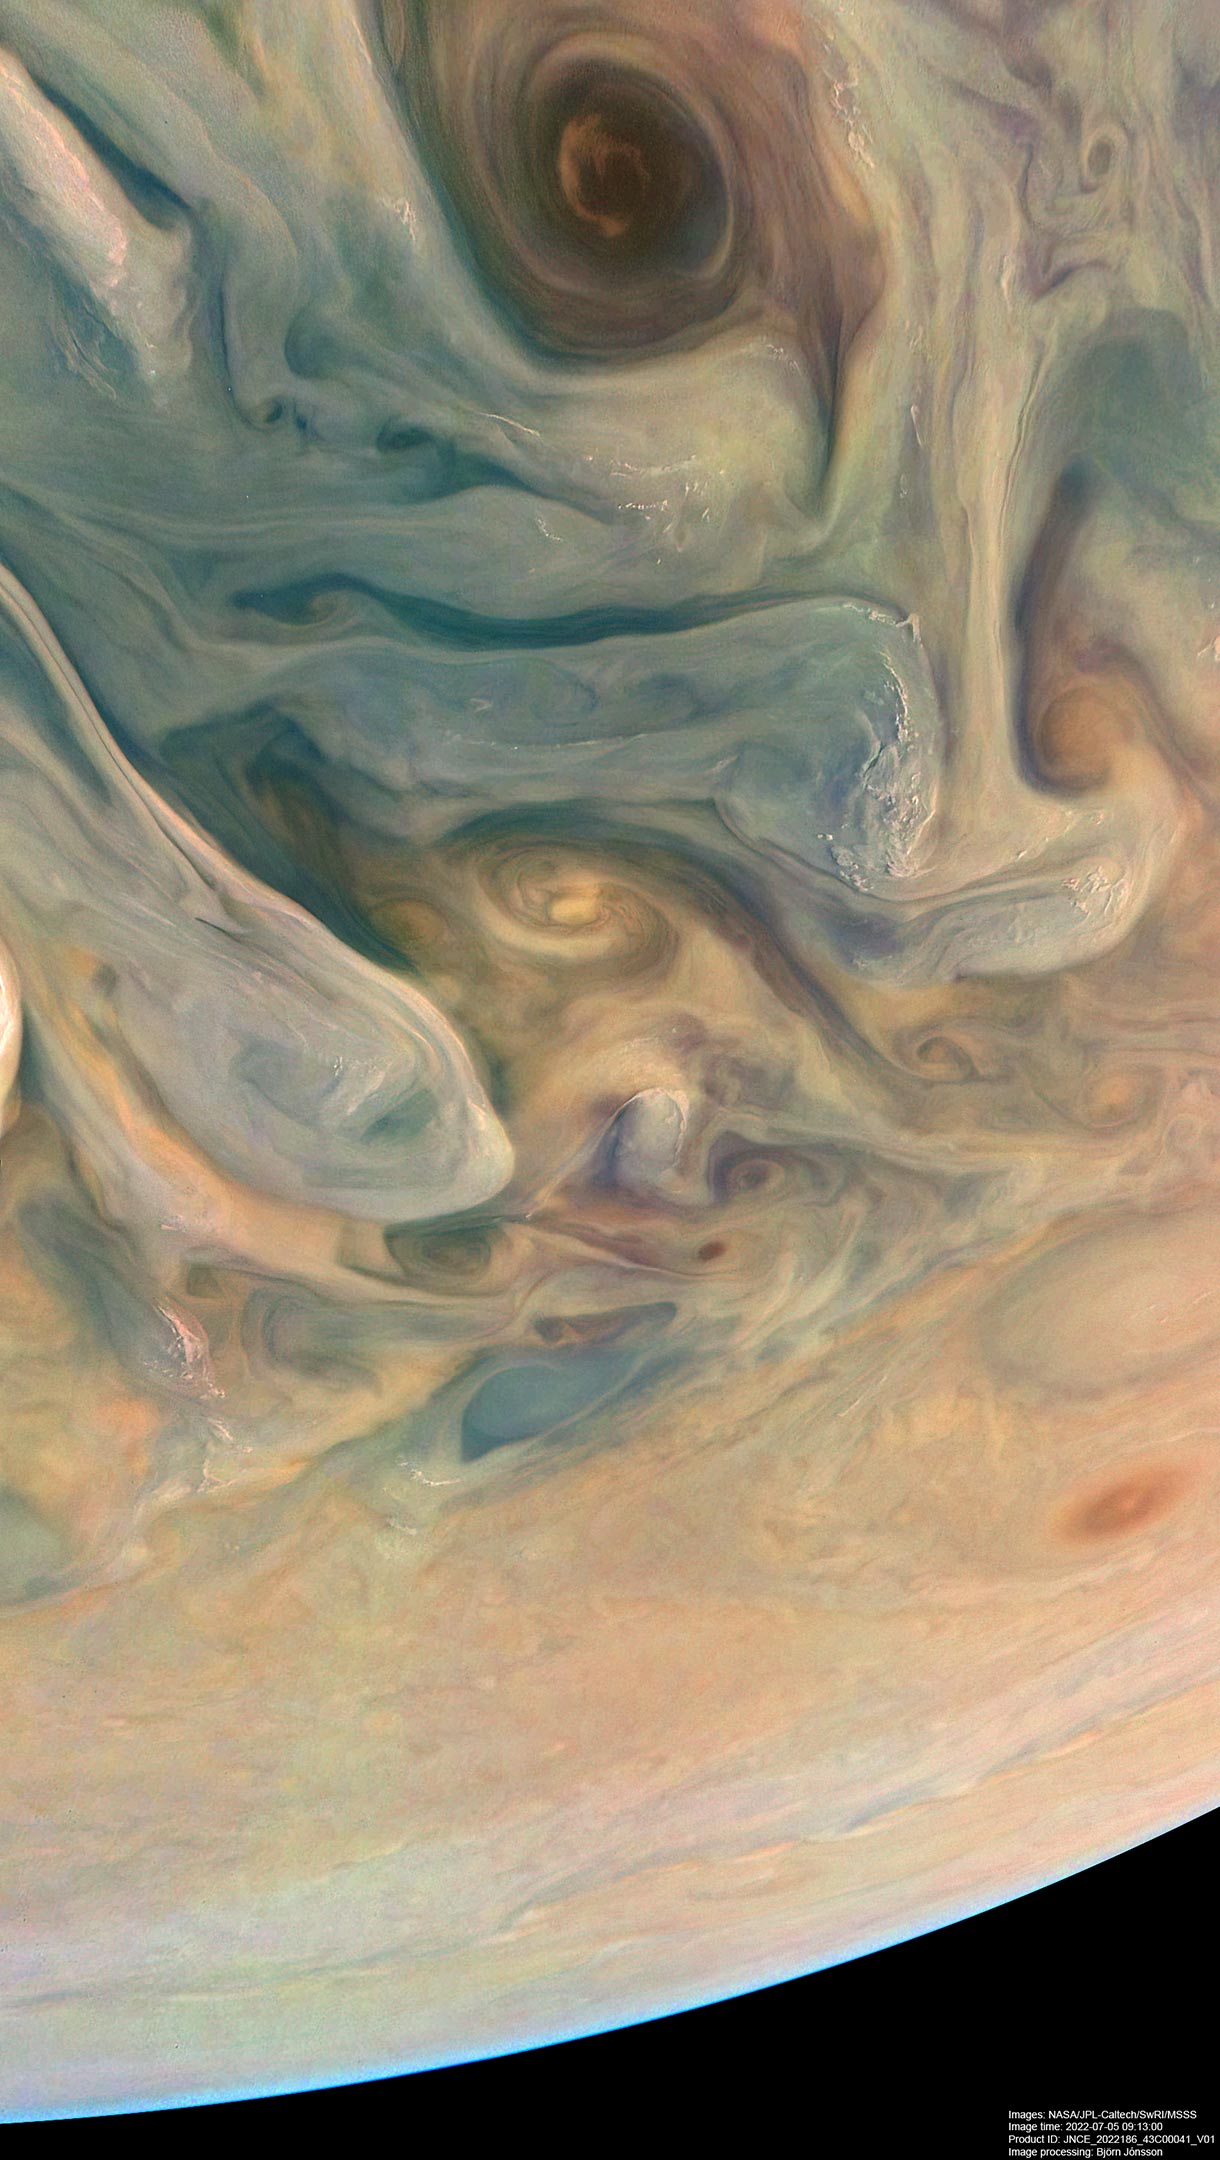 Jupiter's Complex Colors Revealed in Stunning Images From NASA's Juno Spacecraft - SciTechDaily